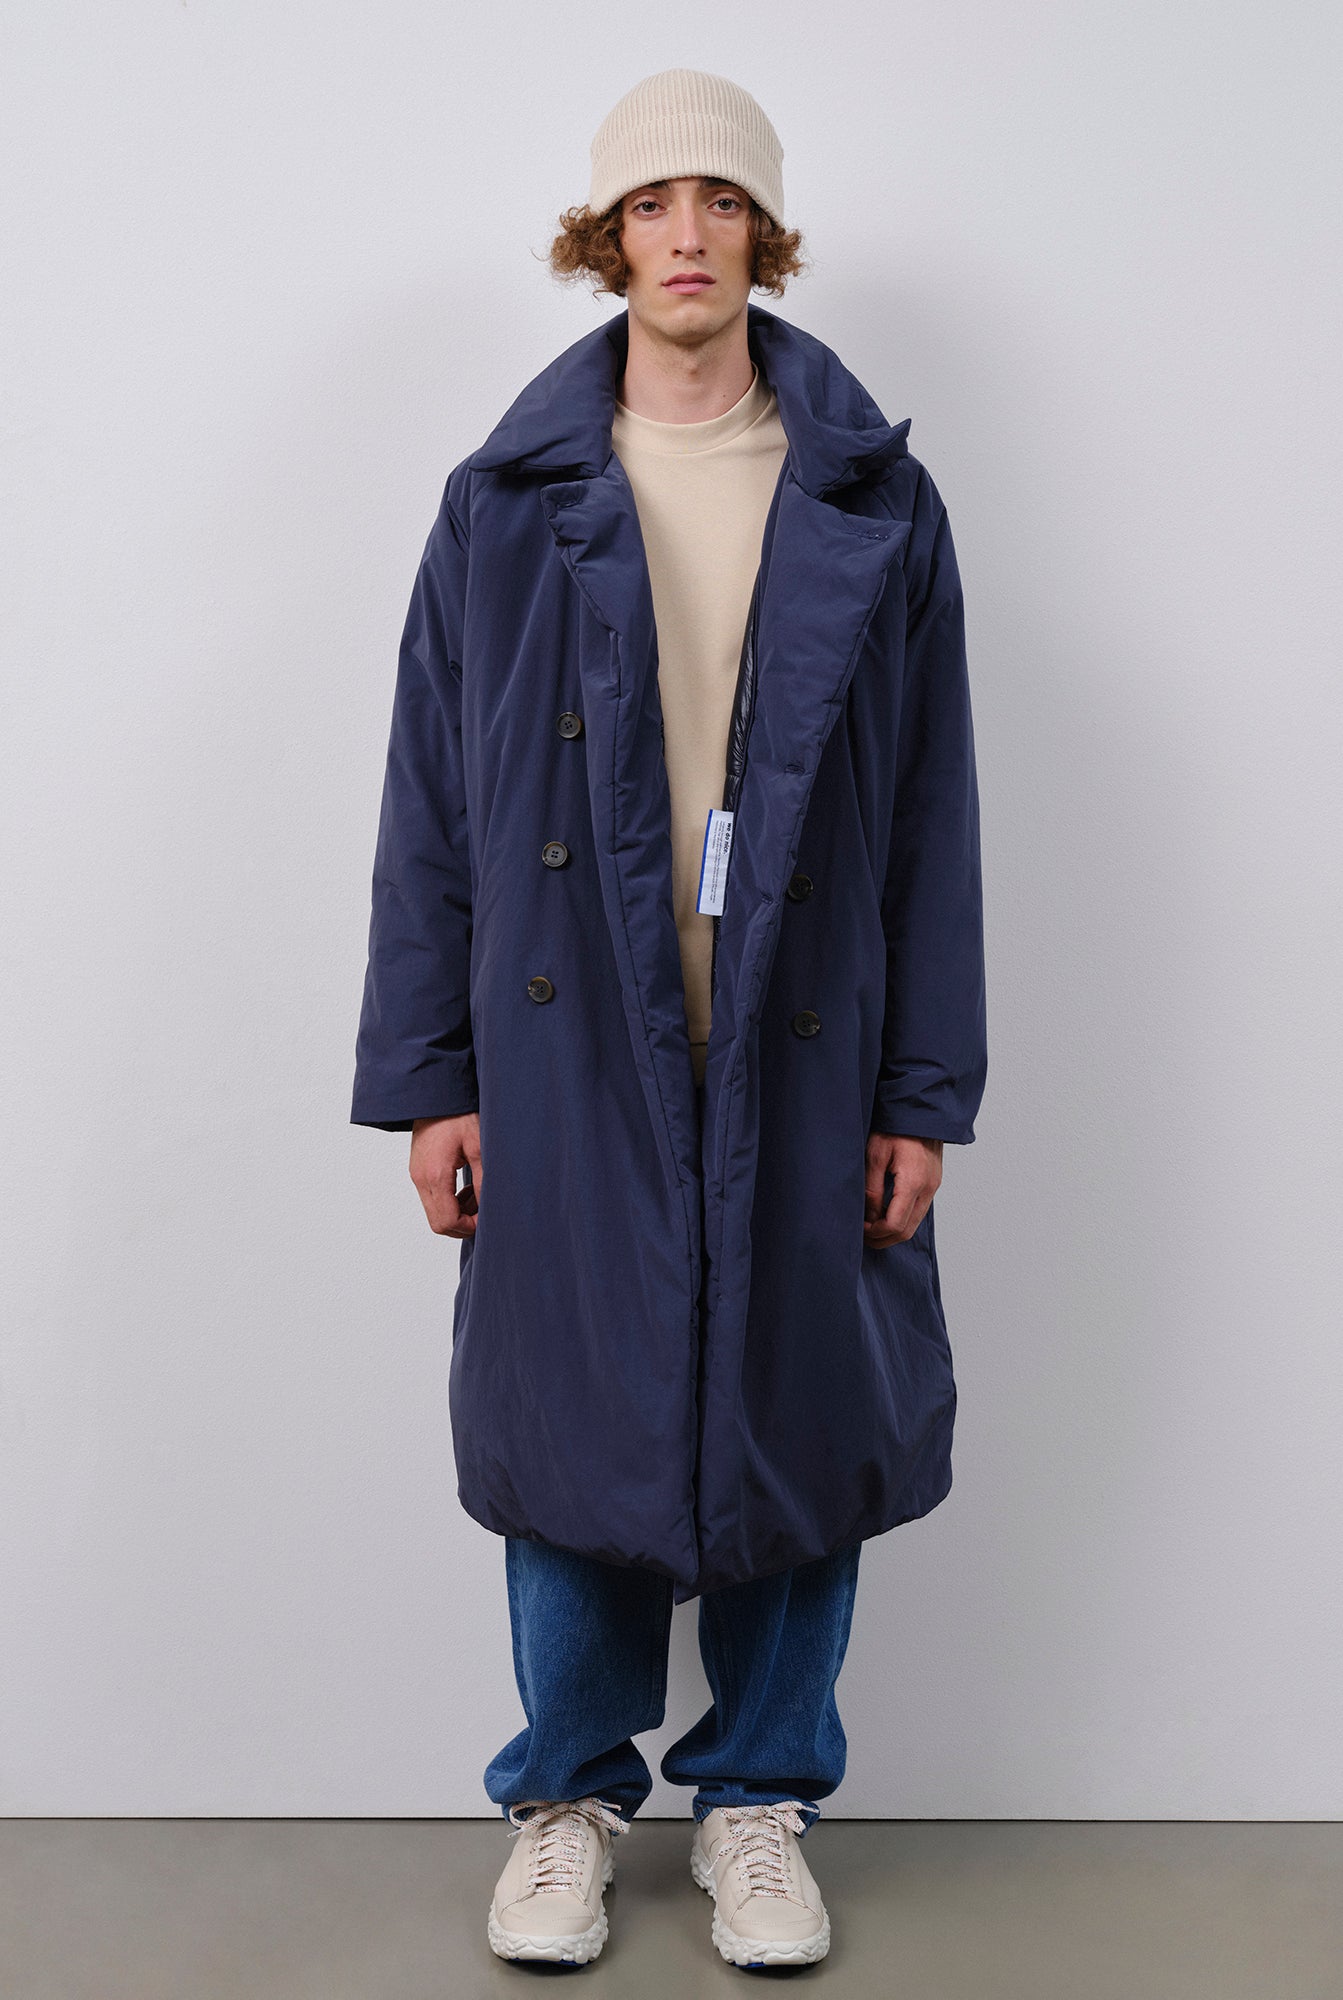 Embassy-of-Bricks-and-Logs-OUTLET-SALE-KINGSGATE-PUFFER-COAT-Jacken-Mantel-ARCHIVE-COLLECTION.jpg